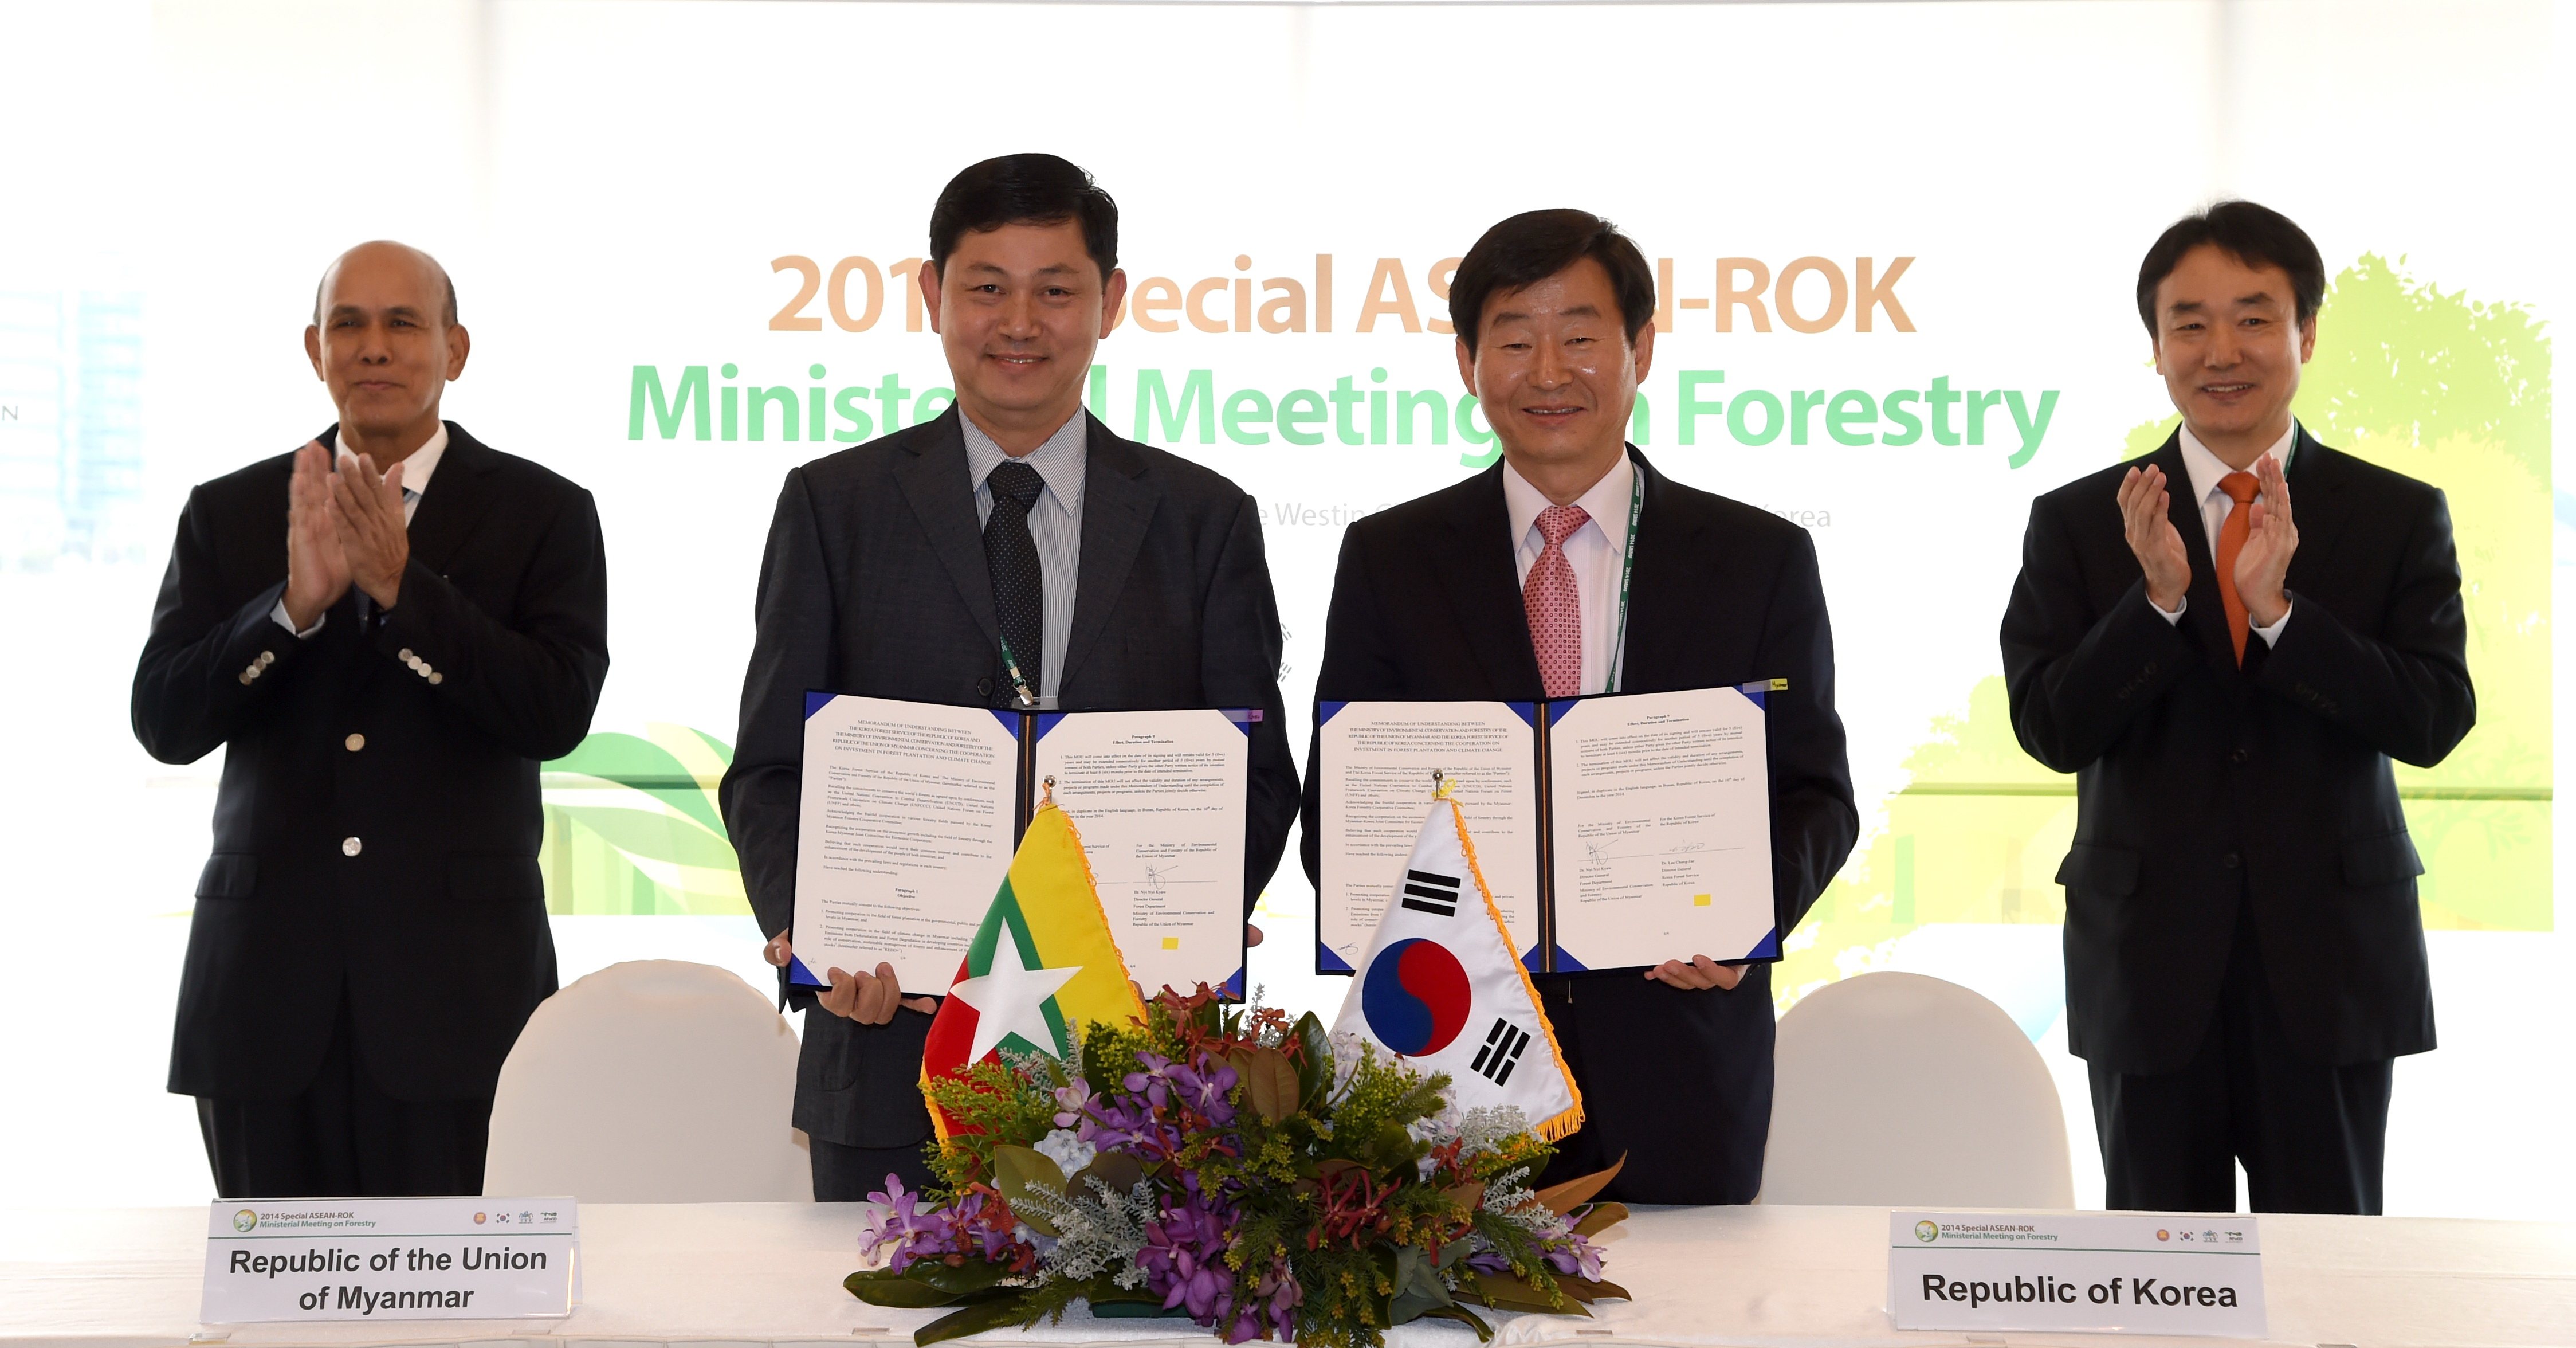 MOU with Myanmar on Forest Investment 이미지1